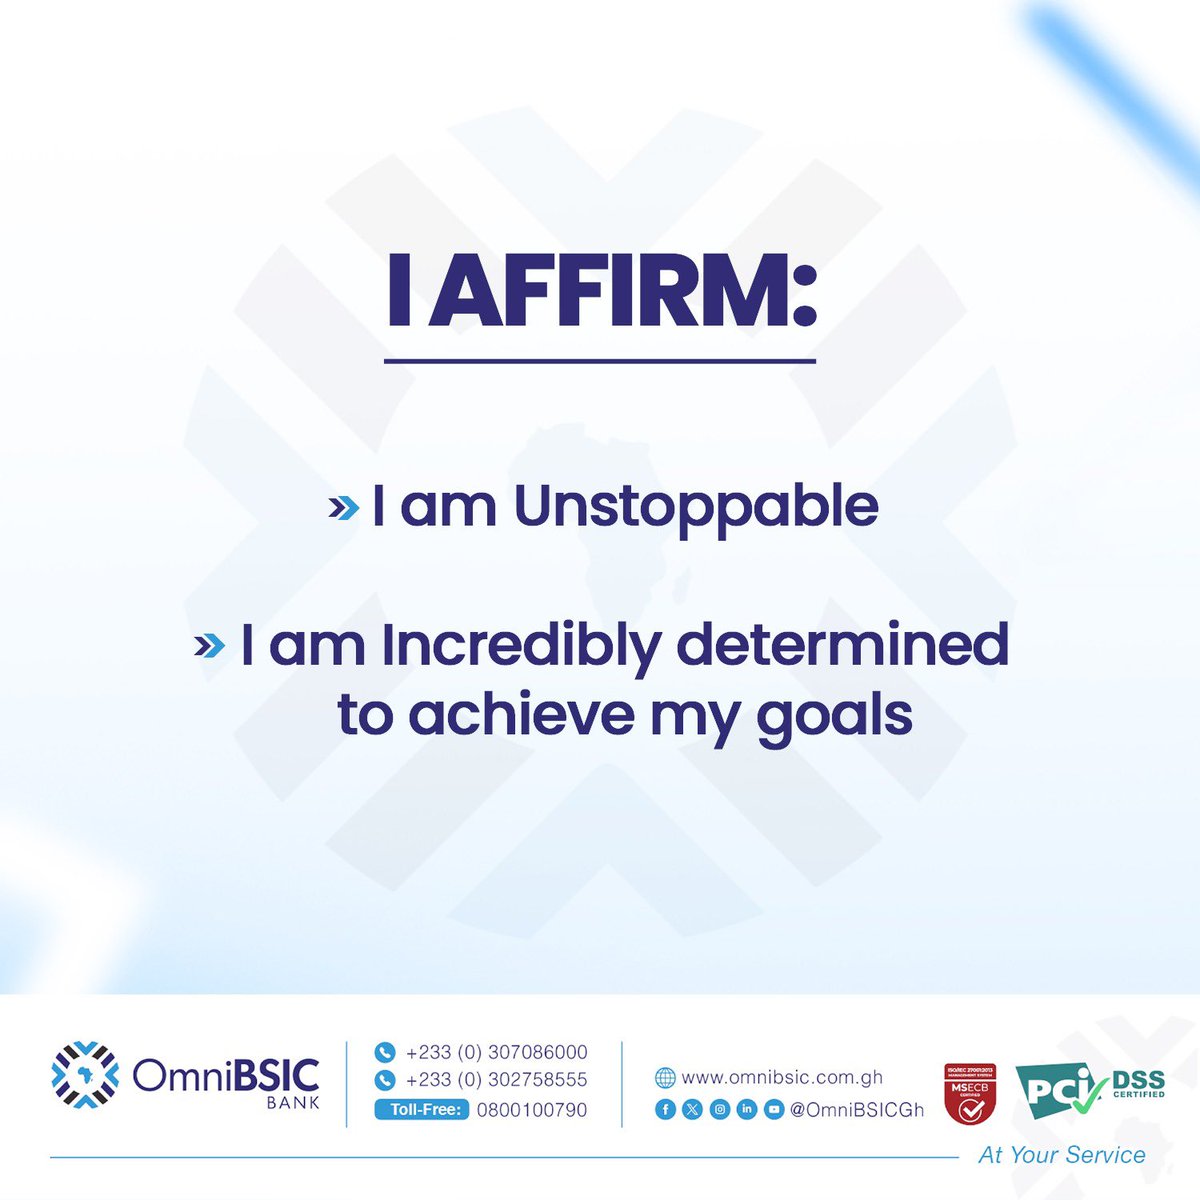 Repeat this: 

I am Unstoppable 
I am incredibly determined to achieve my goals 😊

#OmniBSICBank #BestBanksInGhana #BanksInGhana #AtYourService 
omnibsic.com.gh